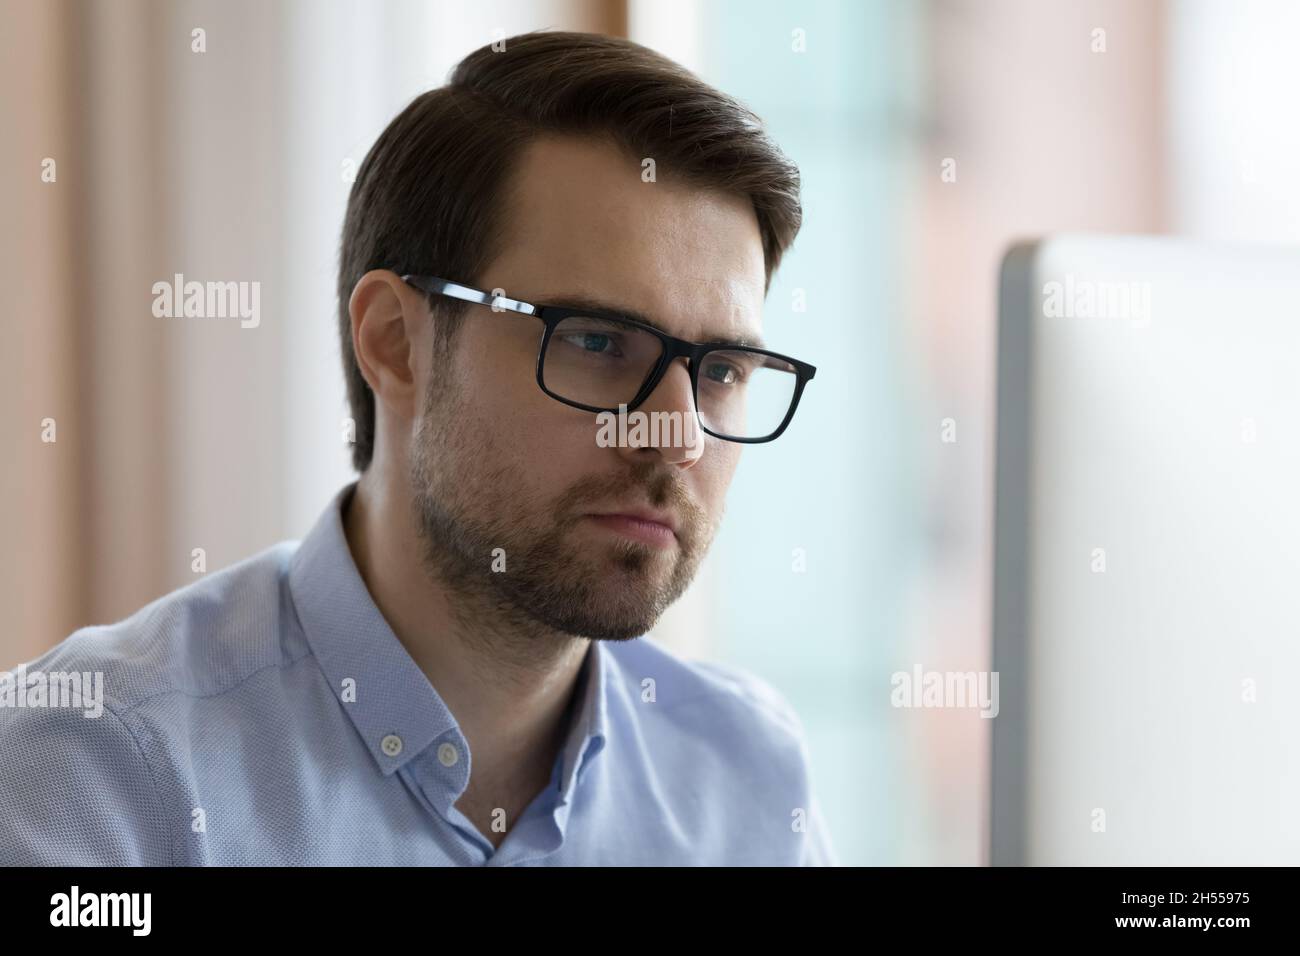 Pensive serious young businessman working on computer. Stock Photo